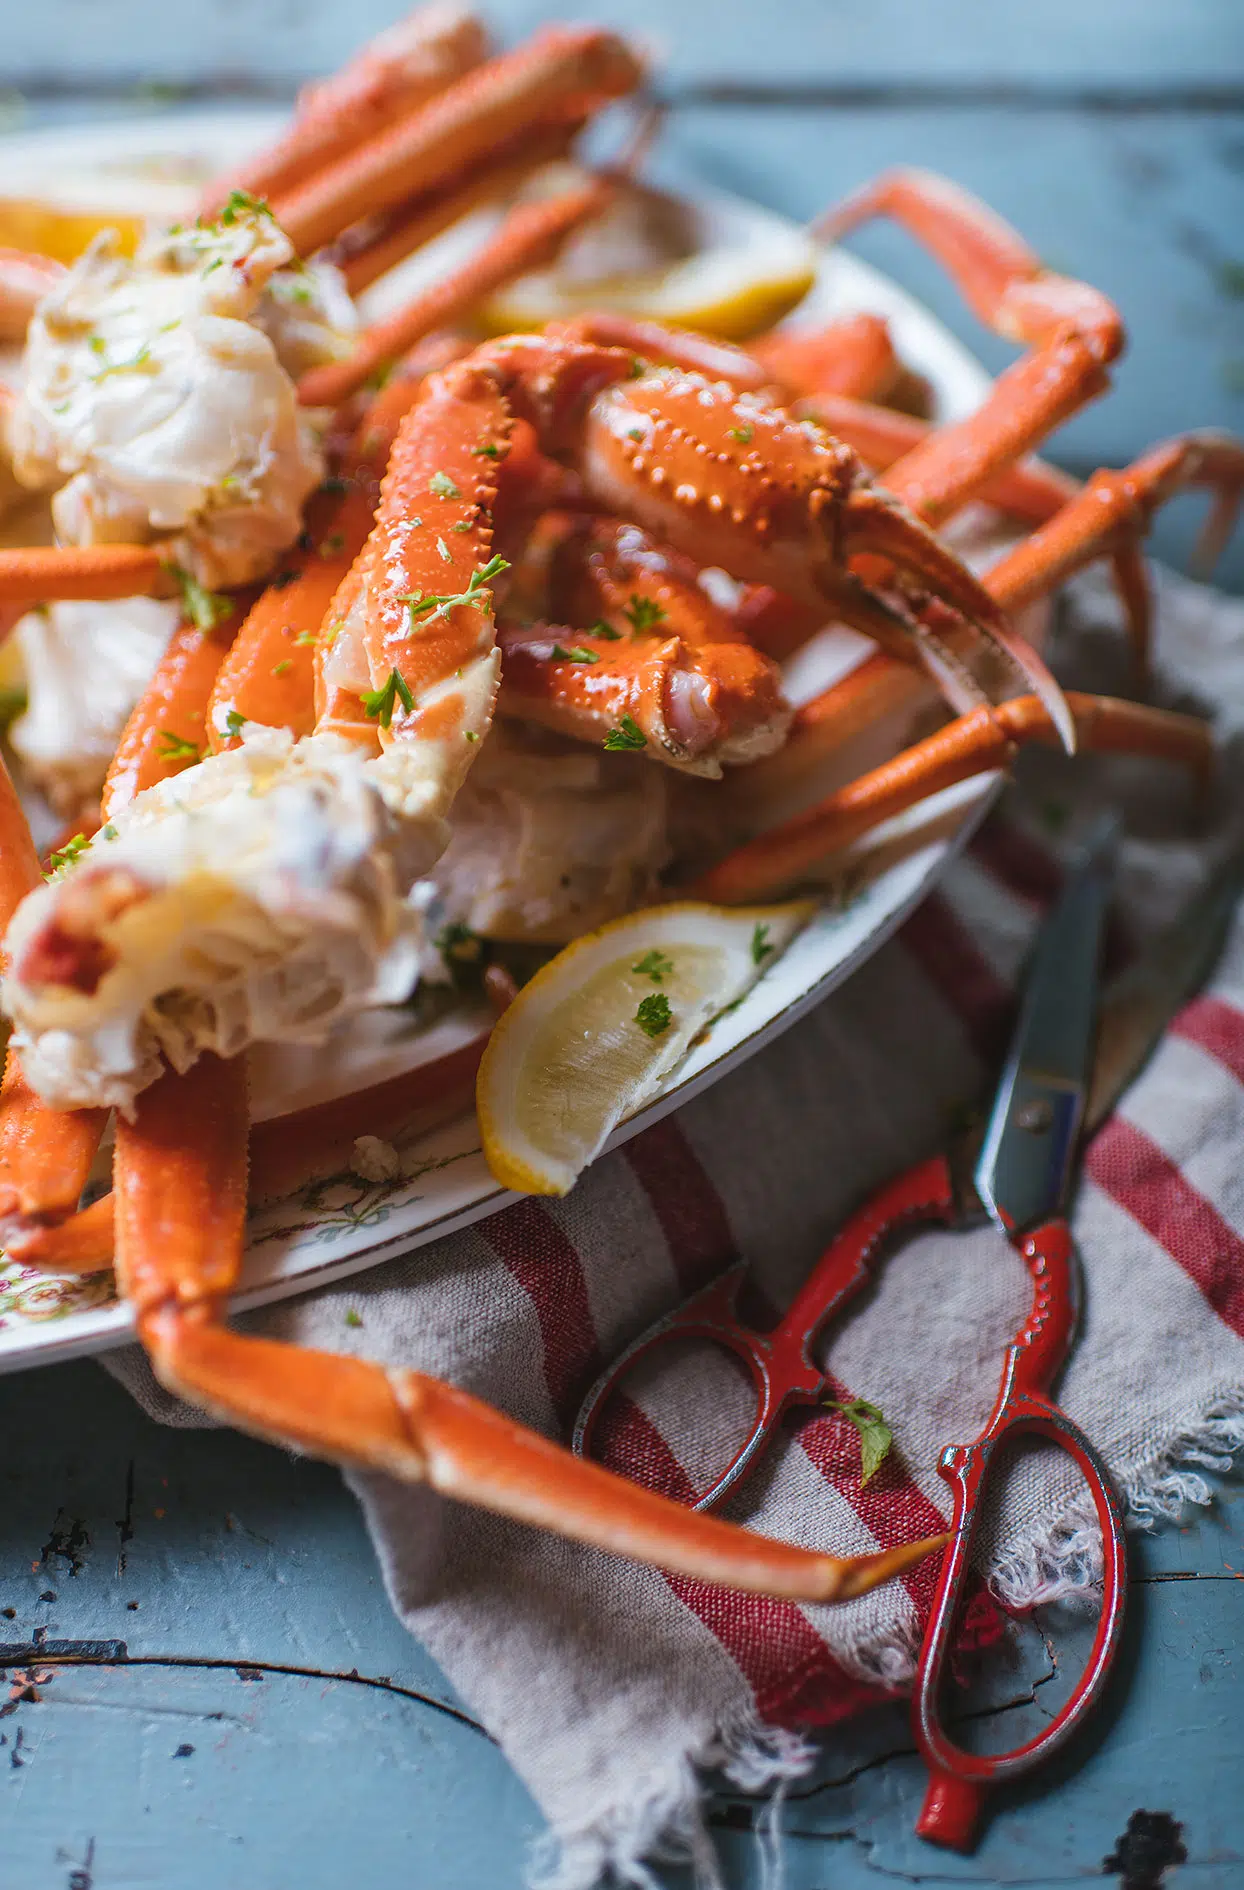 Snow crab with garlic and herbs butter